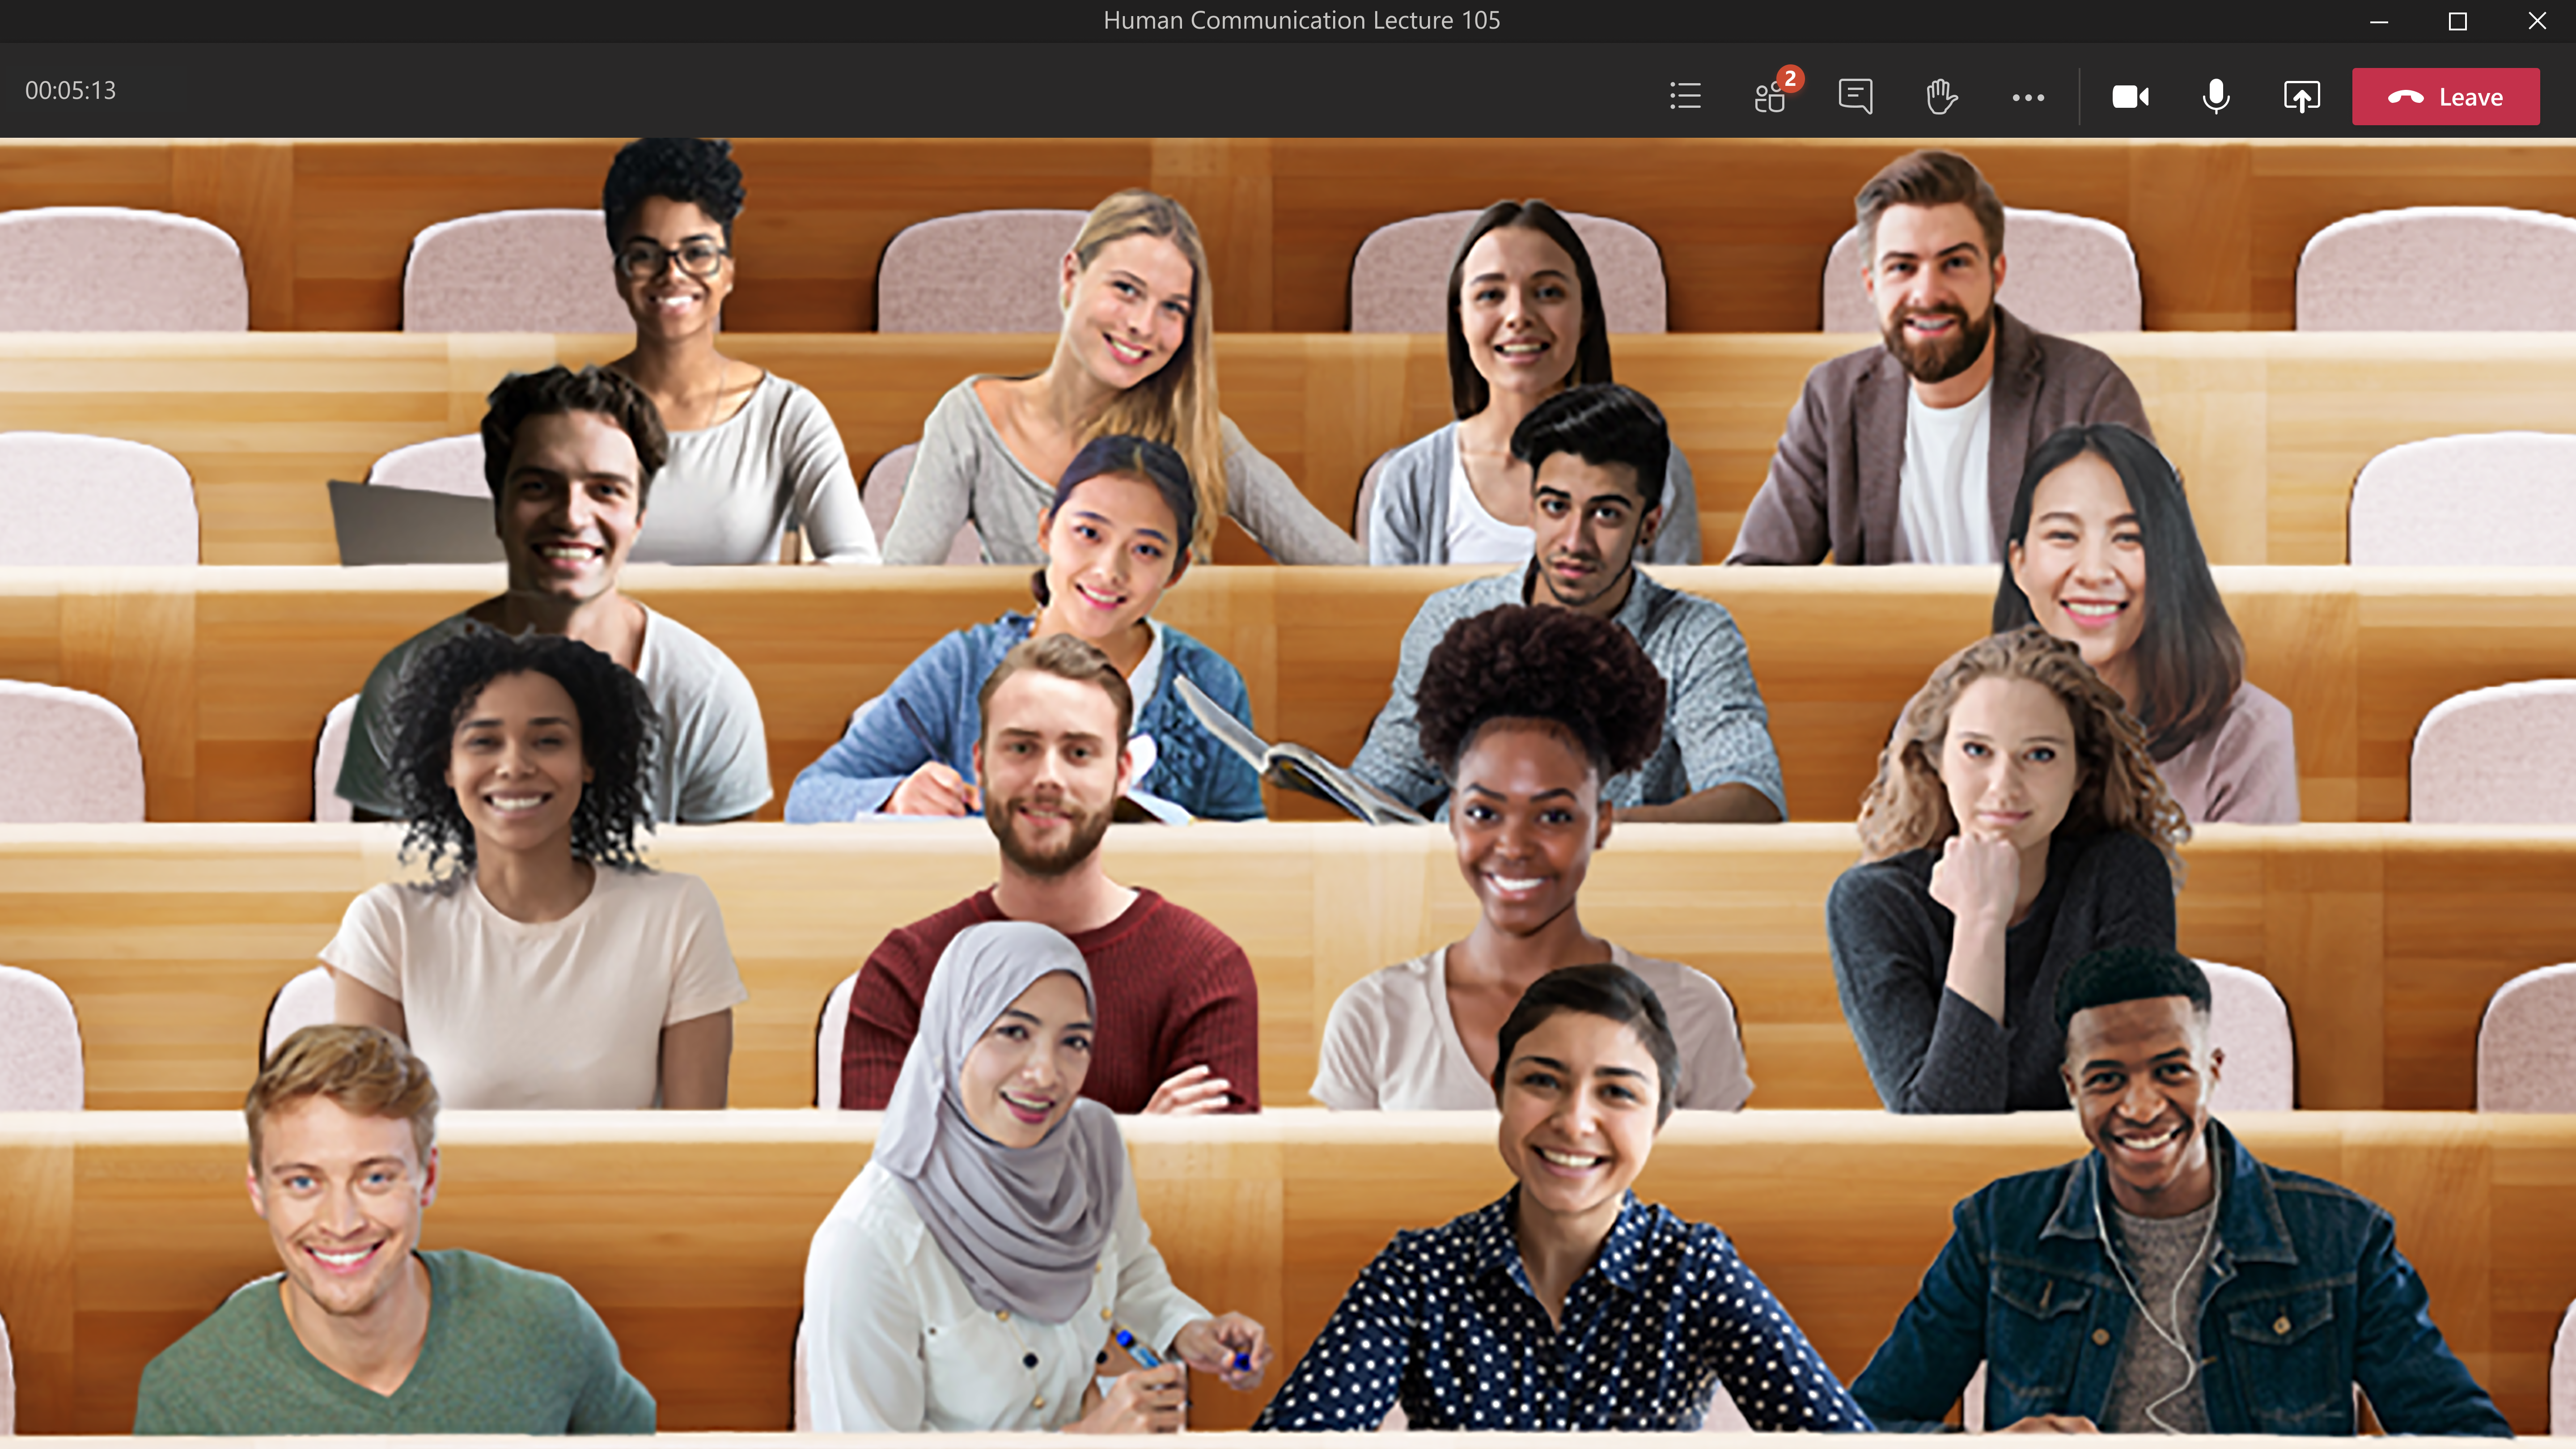 Group of People in Together Mode, Microsoft Teams